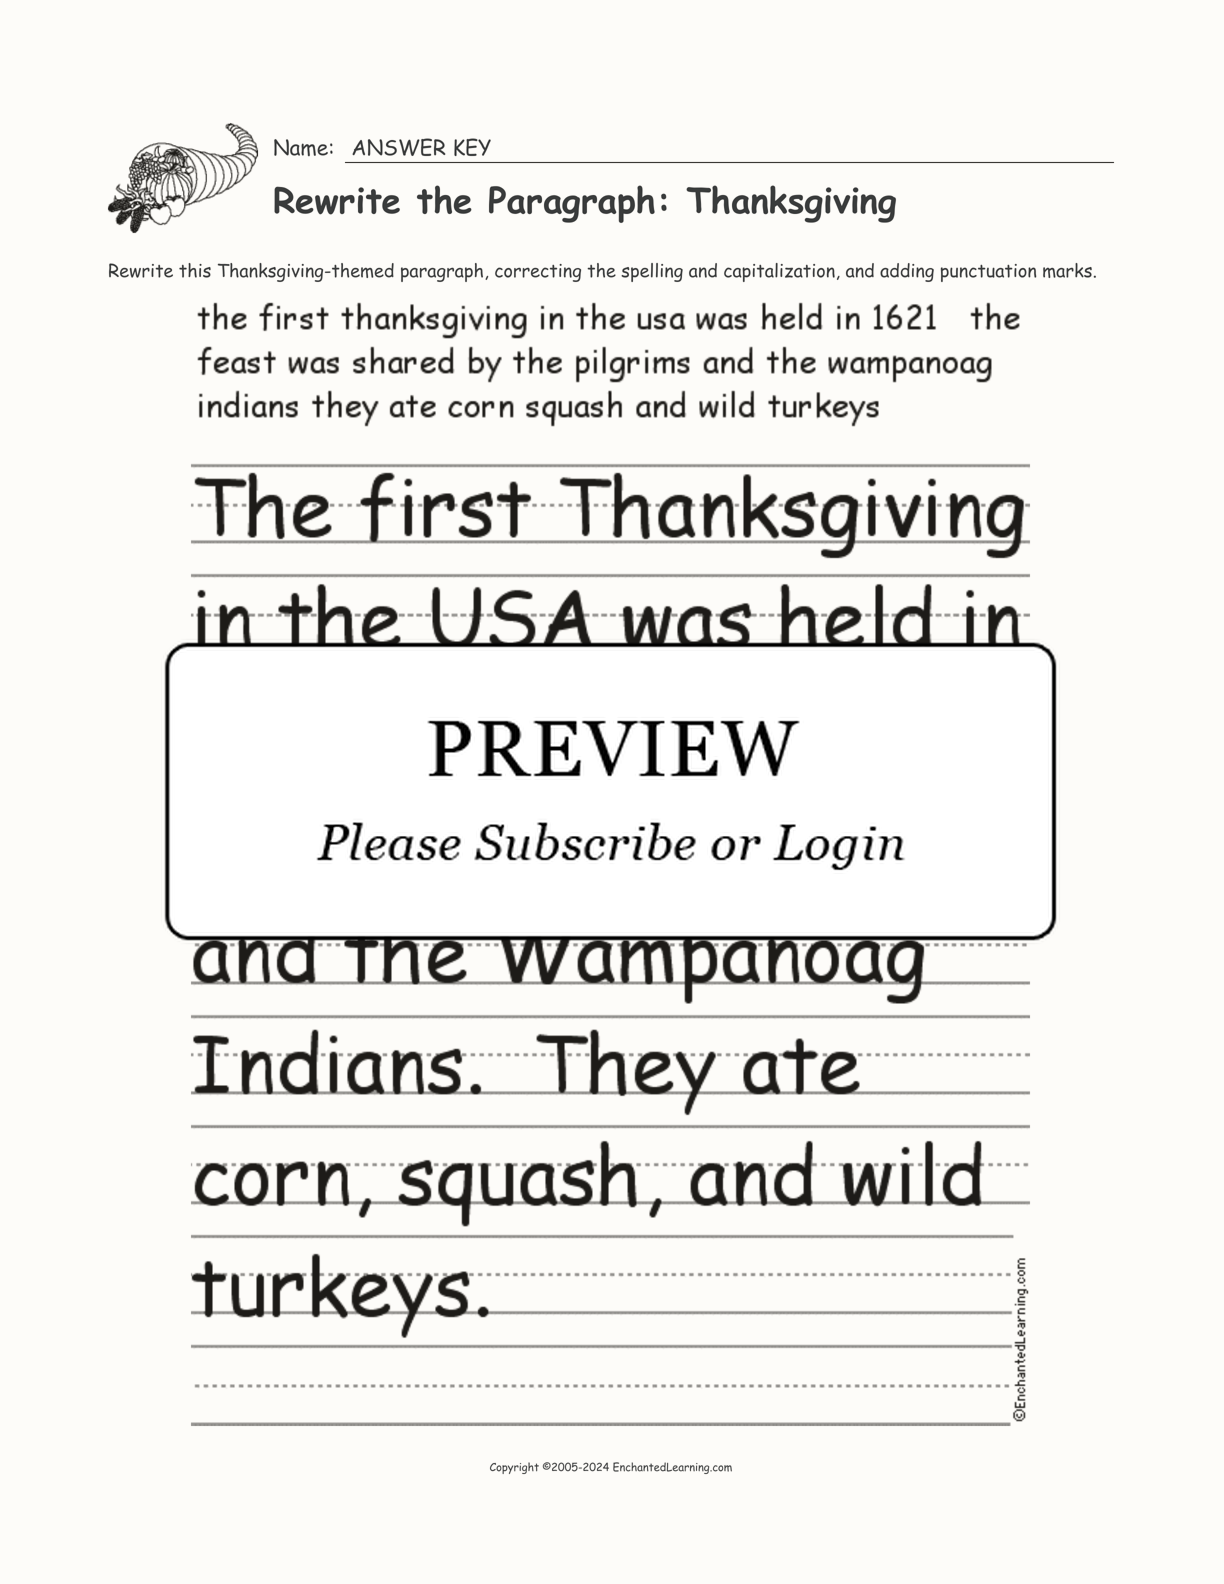 Rewrite the Paragraph: Thanksgiving interactive worksheet page 2